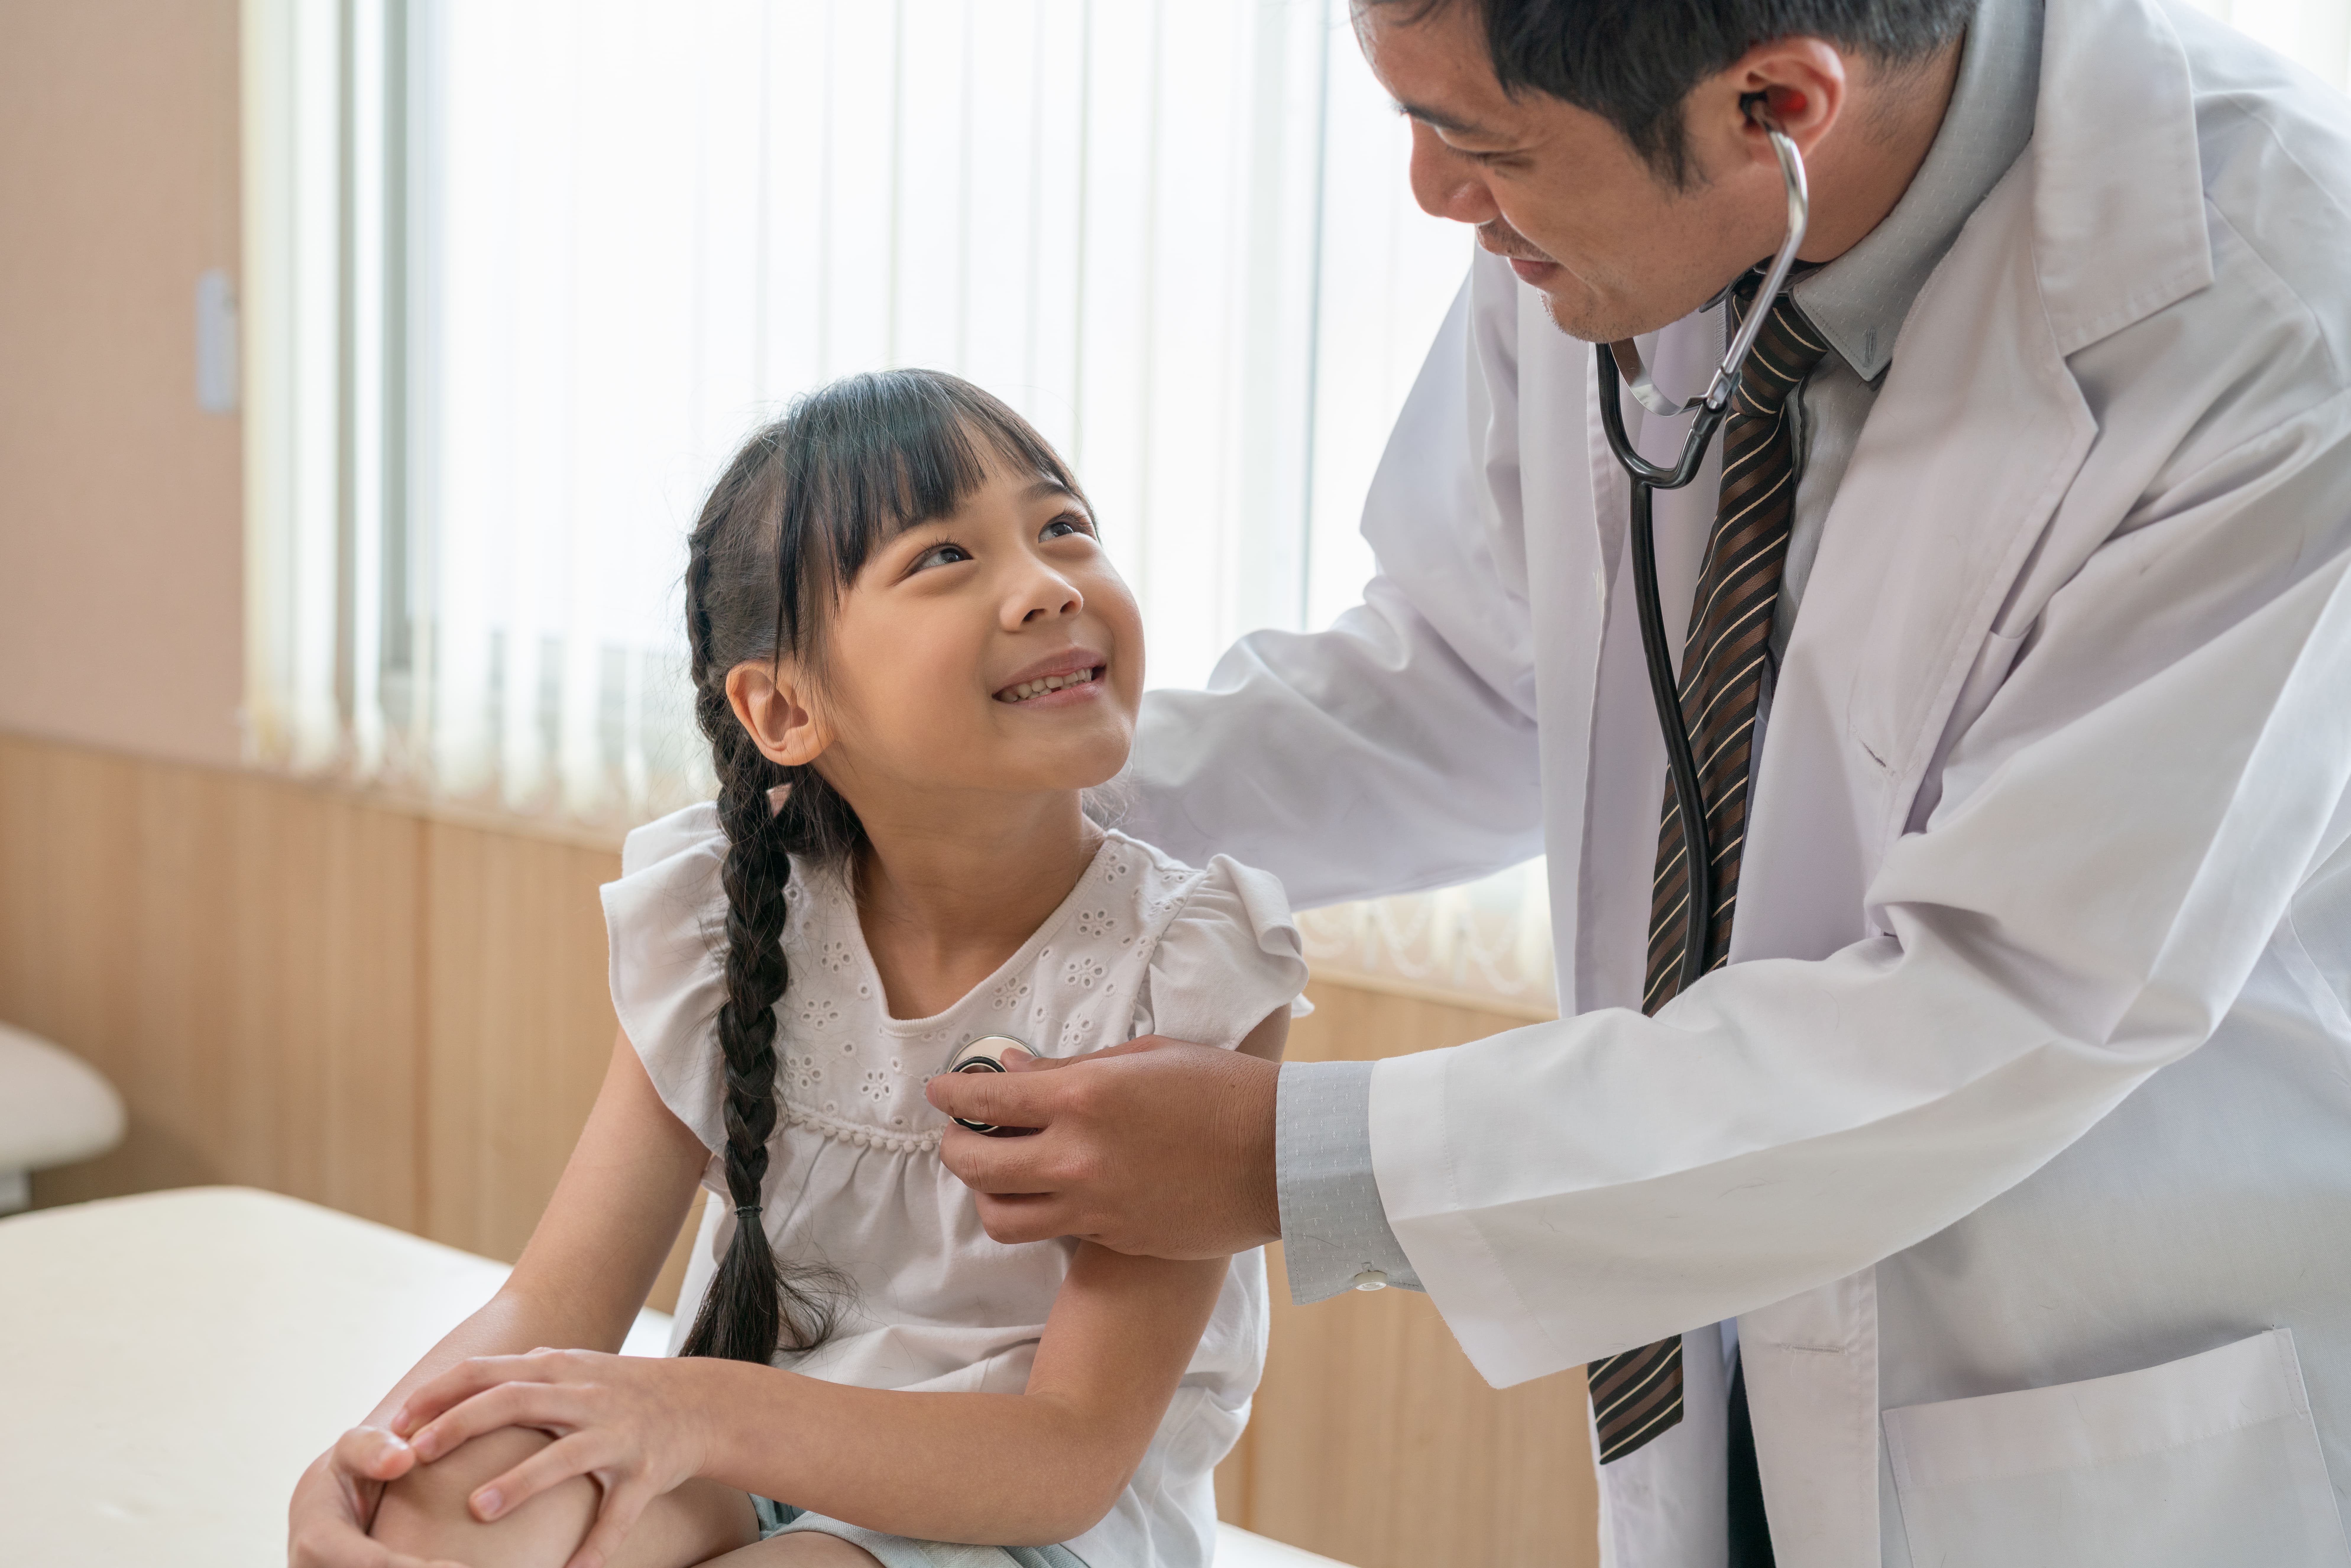 doctor-using-stethoscope-examine-little-girl-patient-hospital